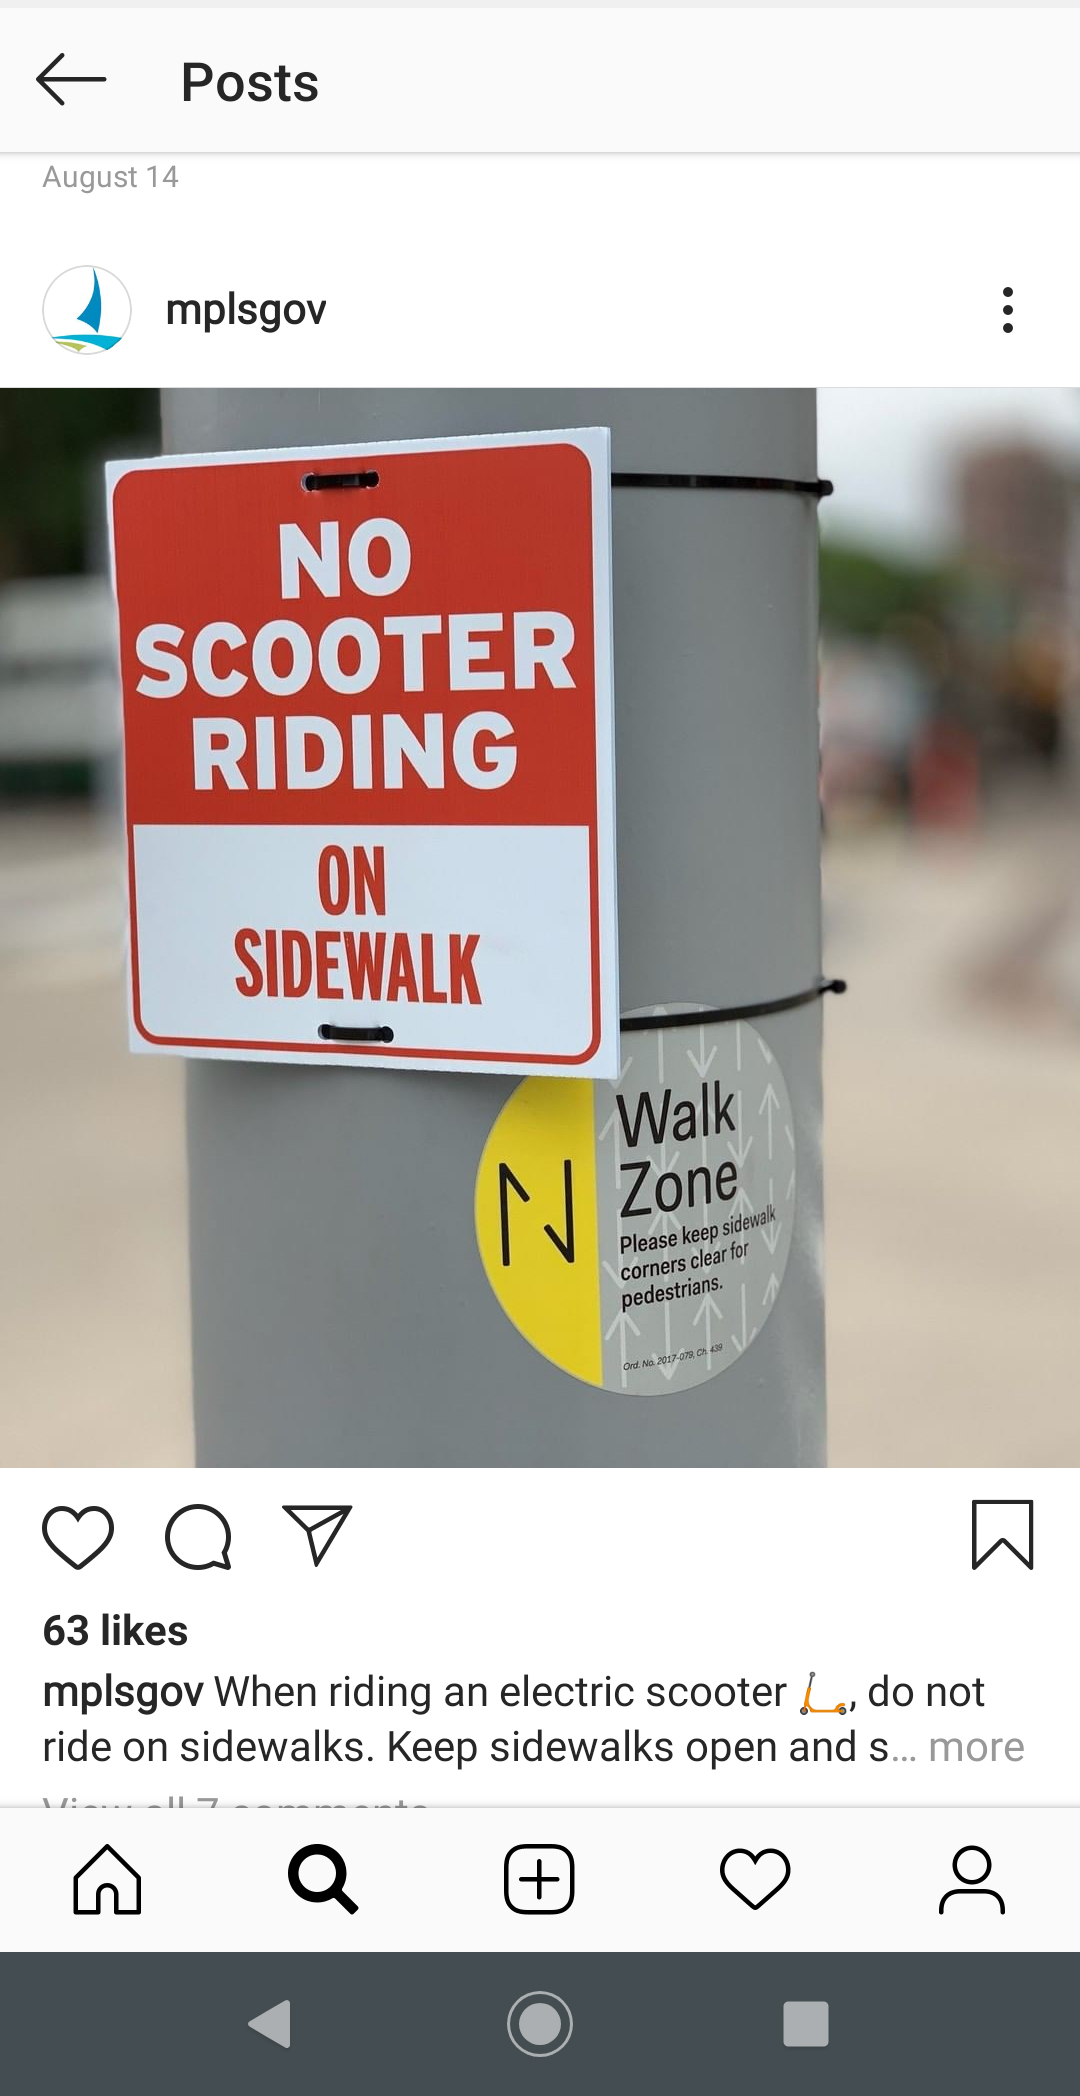 Scooter safety social media channel post from City of Minneapolis